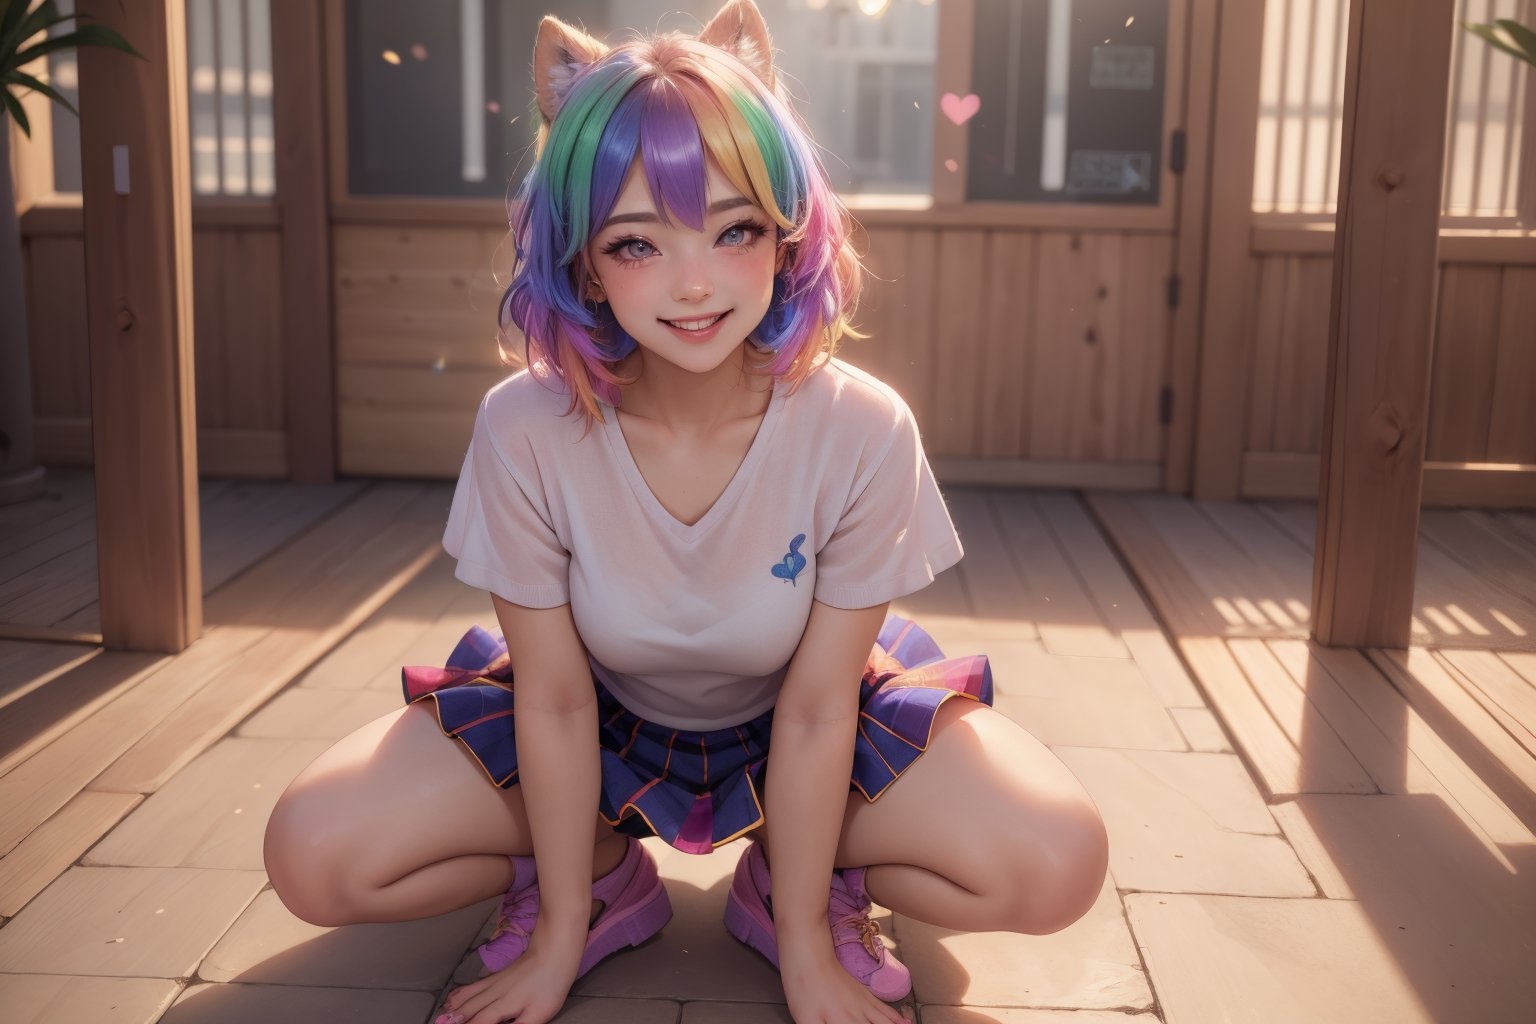 (best quality,4k,8k,highres,masterpiece:1.2),ultra-detailed,(realistic,photorealistic,photo-realistic:1.37),Cute girl,smiling,blushing,short outfit,rainbow color hair,beautiful detailed eyes,beautiful detailed lips,extremely detailed eyes and face,long eyelashes,happy expression,sparkling eyes,perfectly arched eyebrows,vibrant rainbow colors flowing through the hair,soft and silky hair texture,cheeks tinted with a gentle blush,flushed rosy cheeks,sunlight gently illuminating the girl's face, vibrant and vivid colors, youthful and vibrant energy surrounding the girl,bokeh lights,playful and joyful atmosphere, radiant smile that brightens up the scene,delicate and charming facial features,energetic and confident pose,dainty fingers and feminine hands,dainty and cute outfit with a short skirt,comfortable and stylish footwear,magic-like rainbow aura surrounding the girl,playful and cheerful personality,positive and optimistic vibes., tights,peeing self